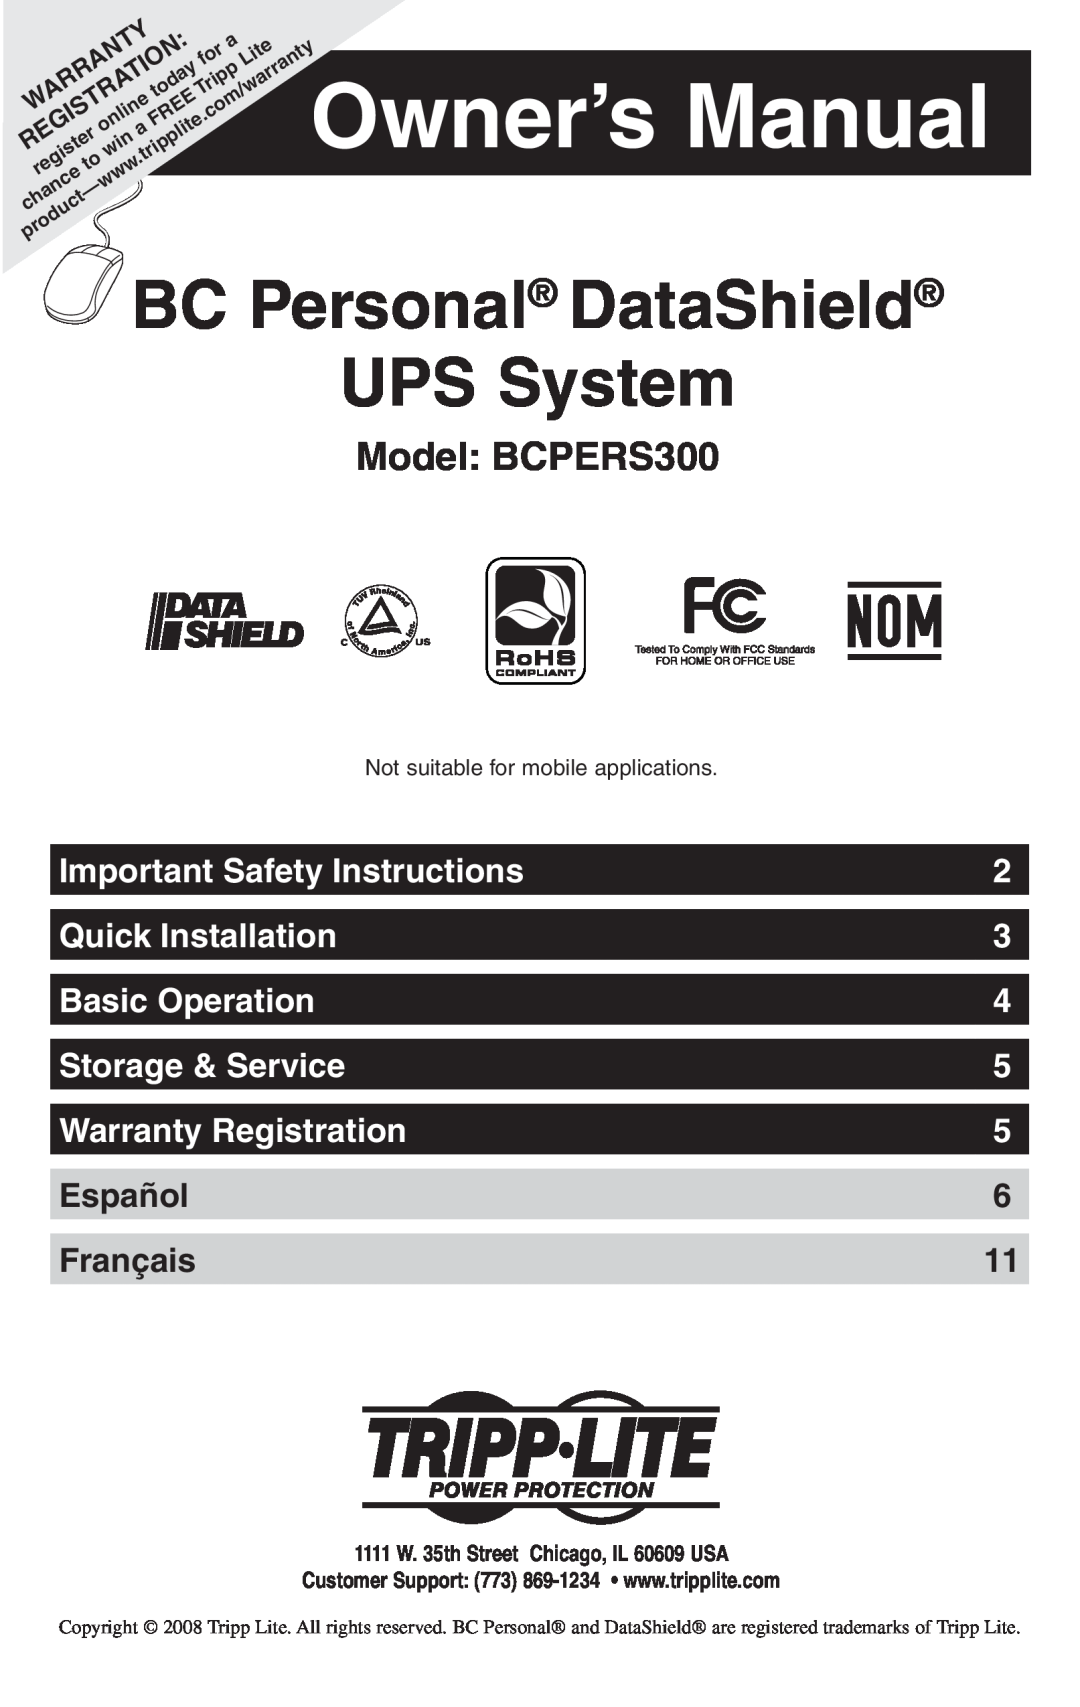 Tripp Lite owner manual Owner’s Manual, Model BCPERS300, Important Safety Instructions, Quick Installation, Español 